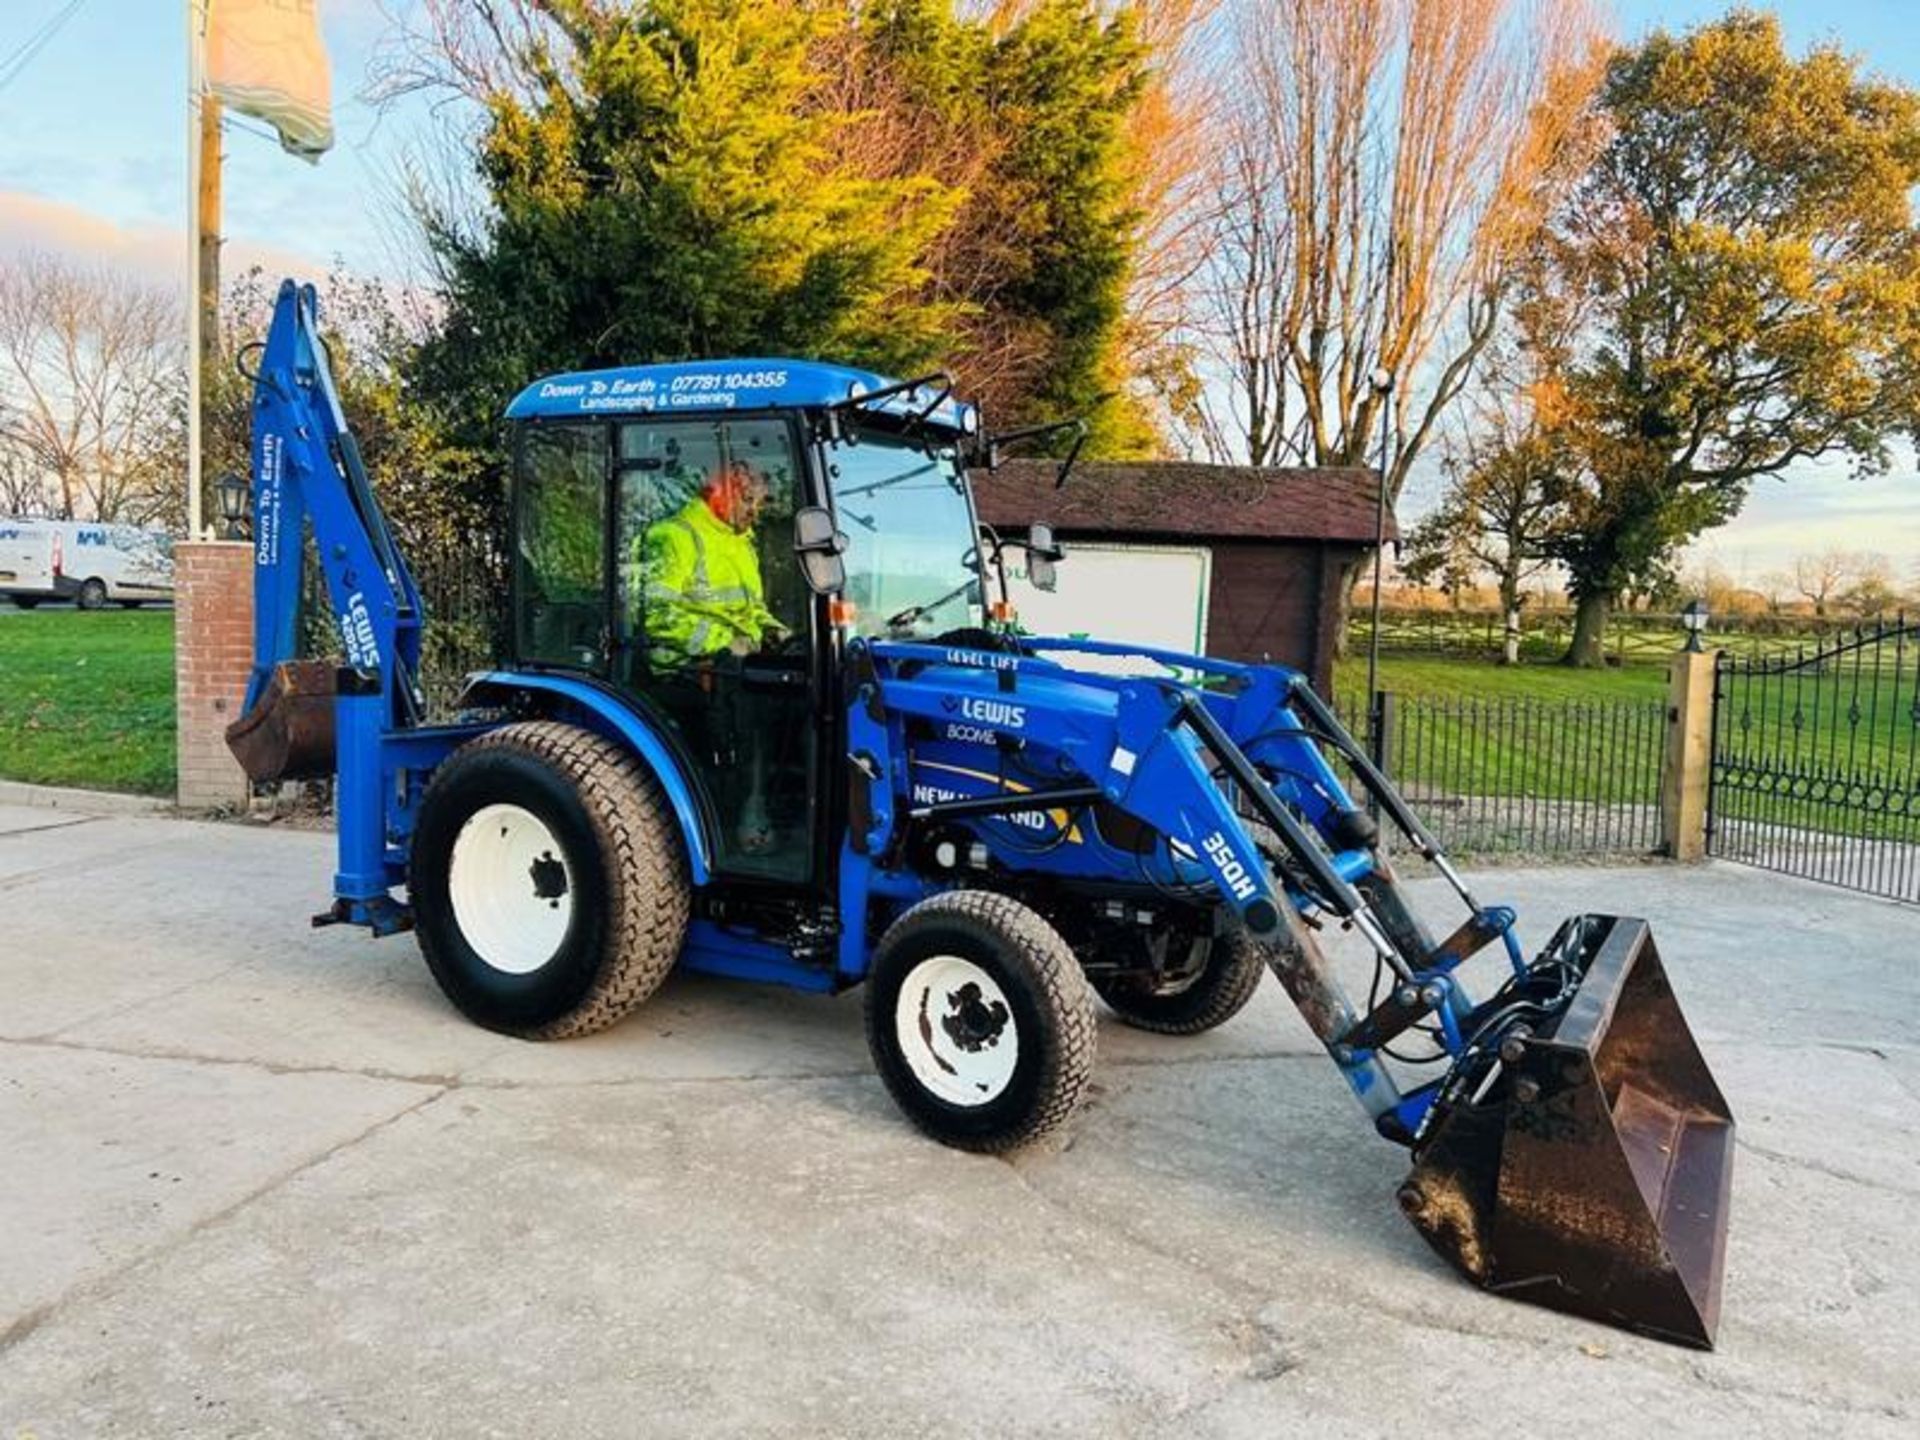 NEW HOLLAND BOOMER 40 4WD TRACTOR *YEAR 2014, ONLY 737 HRS* C/W LOADER & BACK TRACTOR - Image 9 of 19